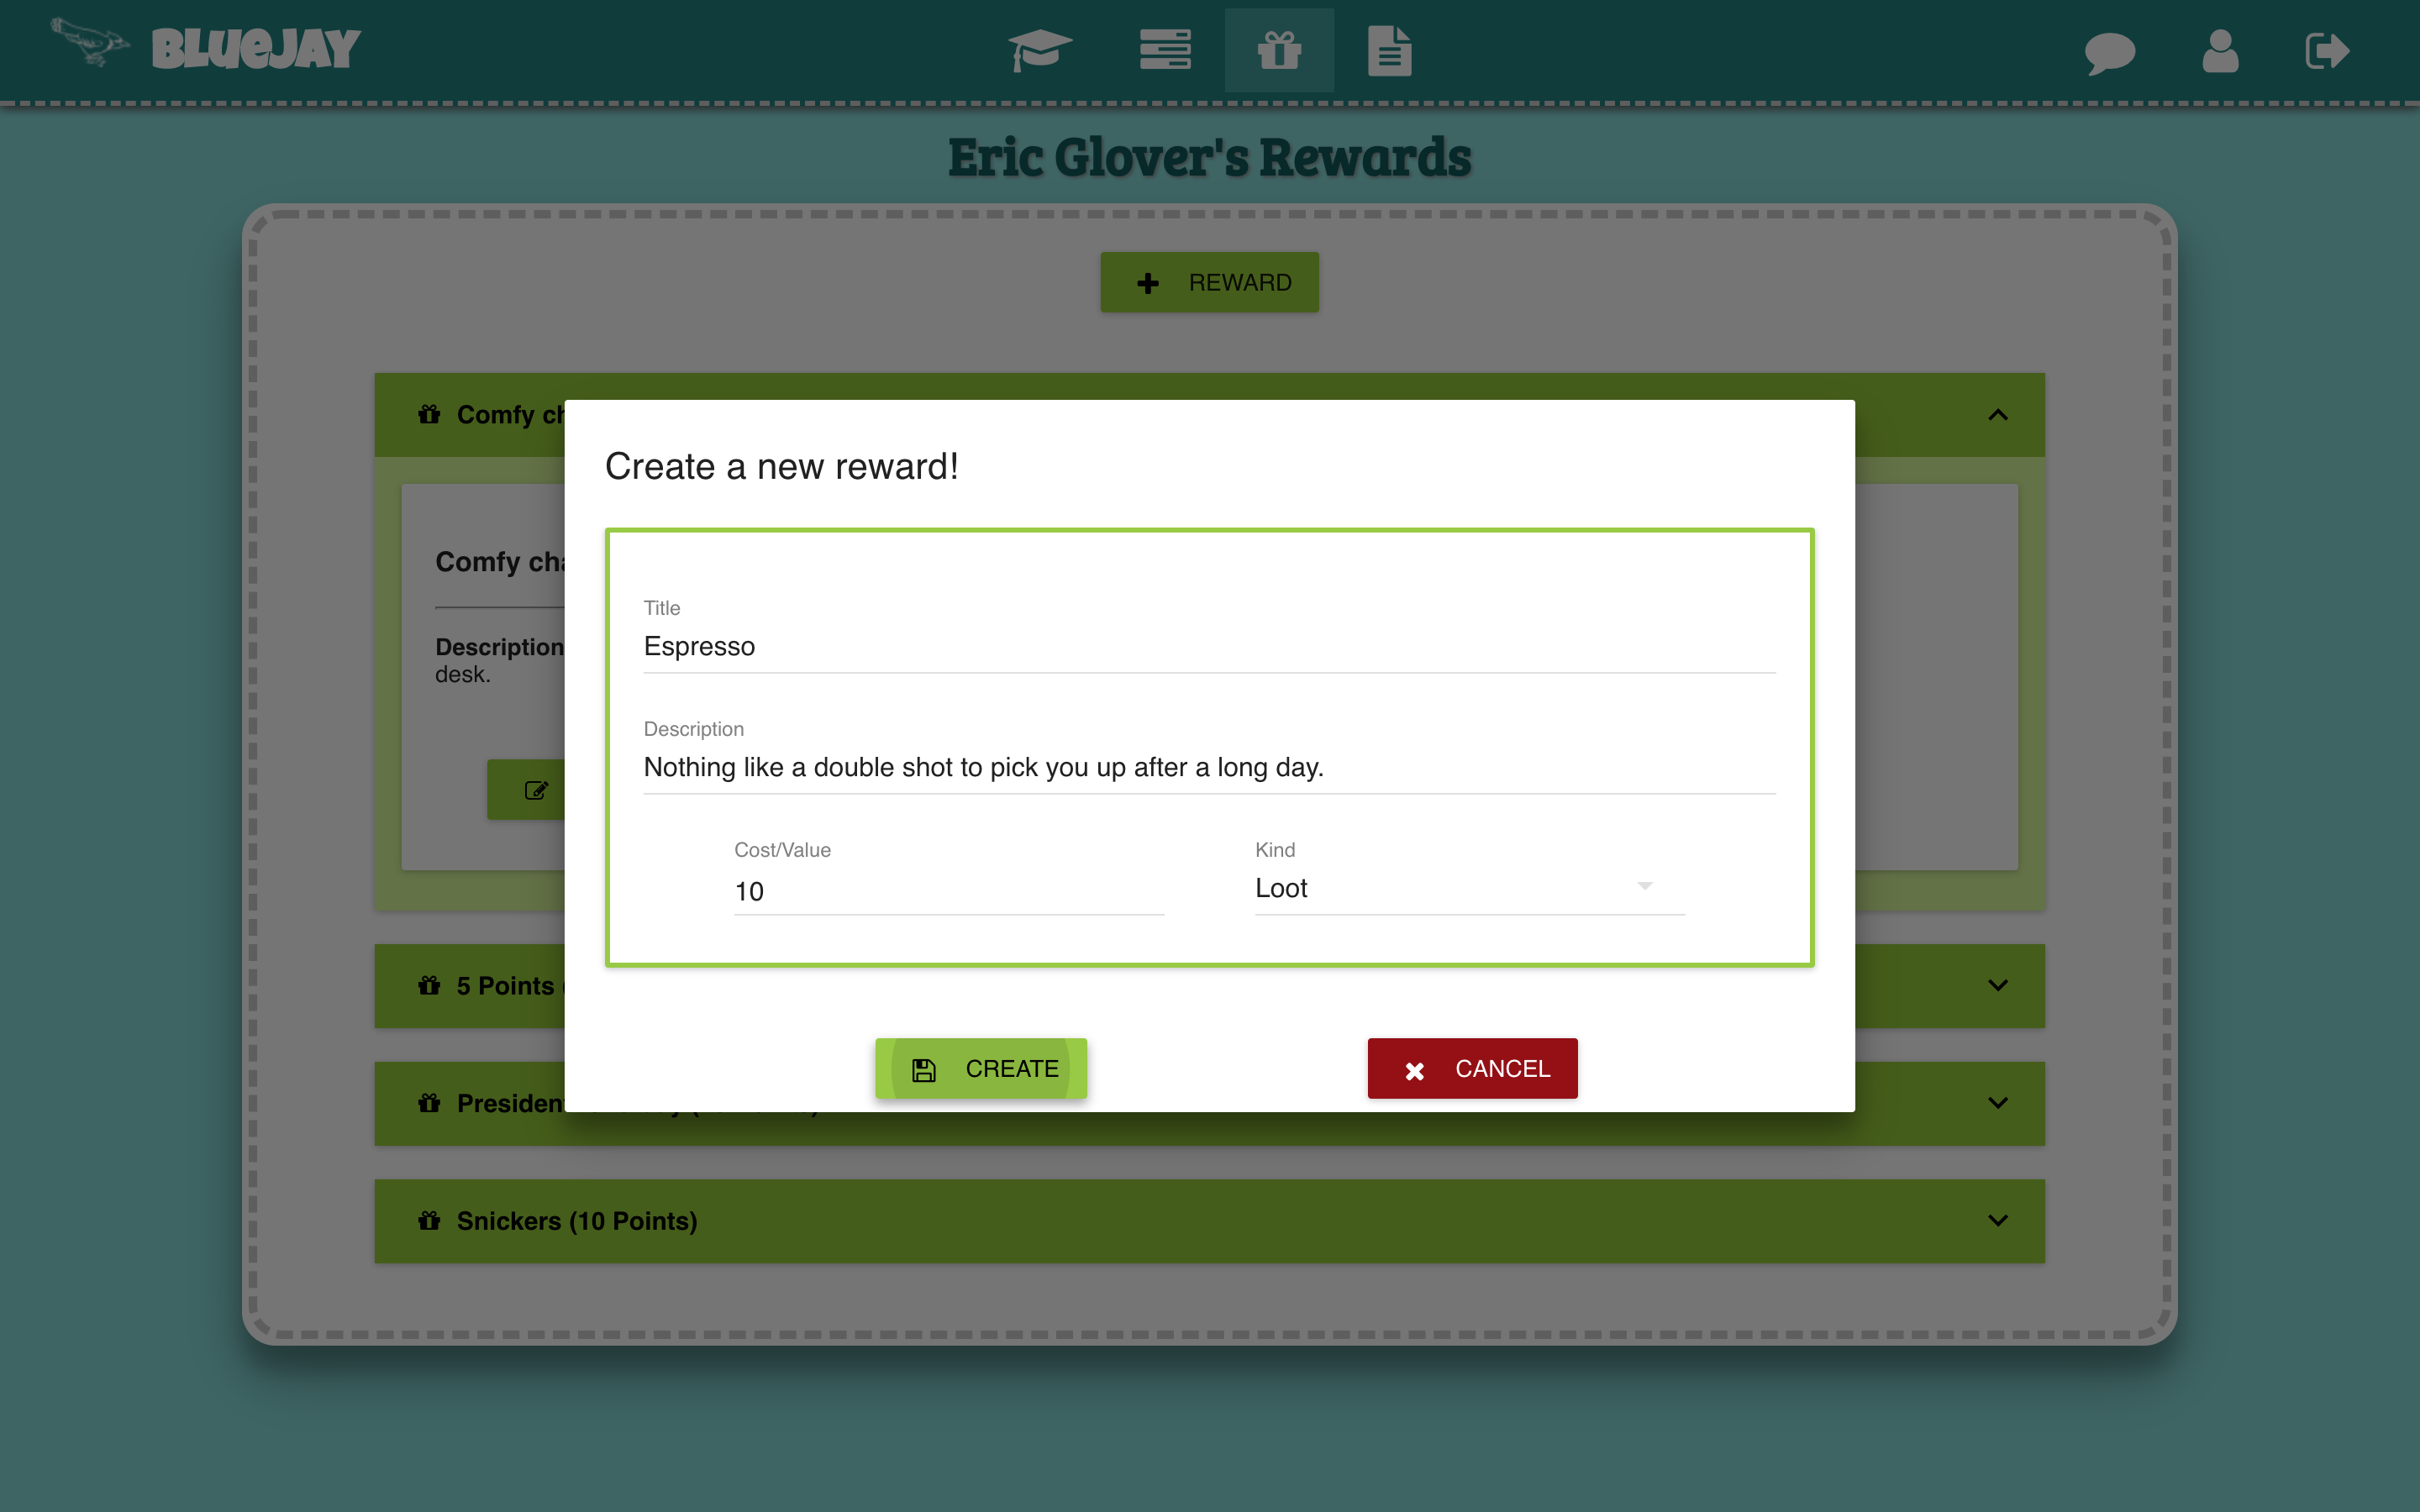 A view showing a form being filled out to create a reward (the reward being created is 'Espresso').